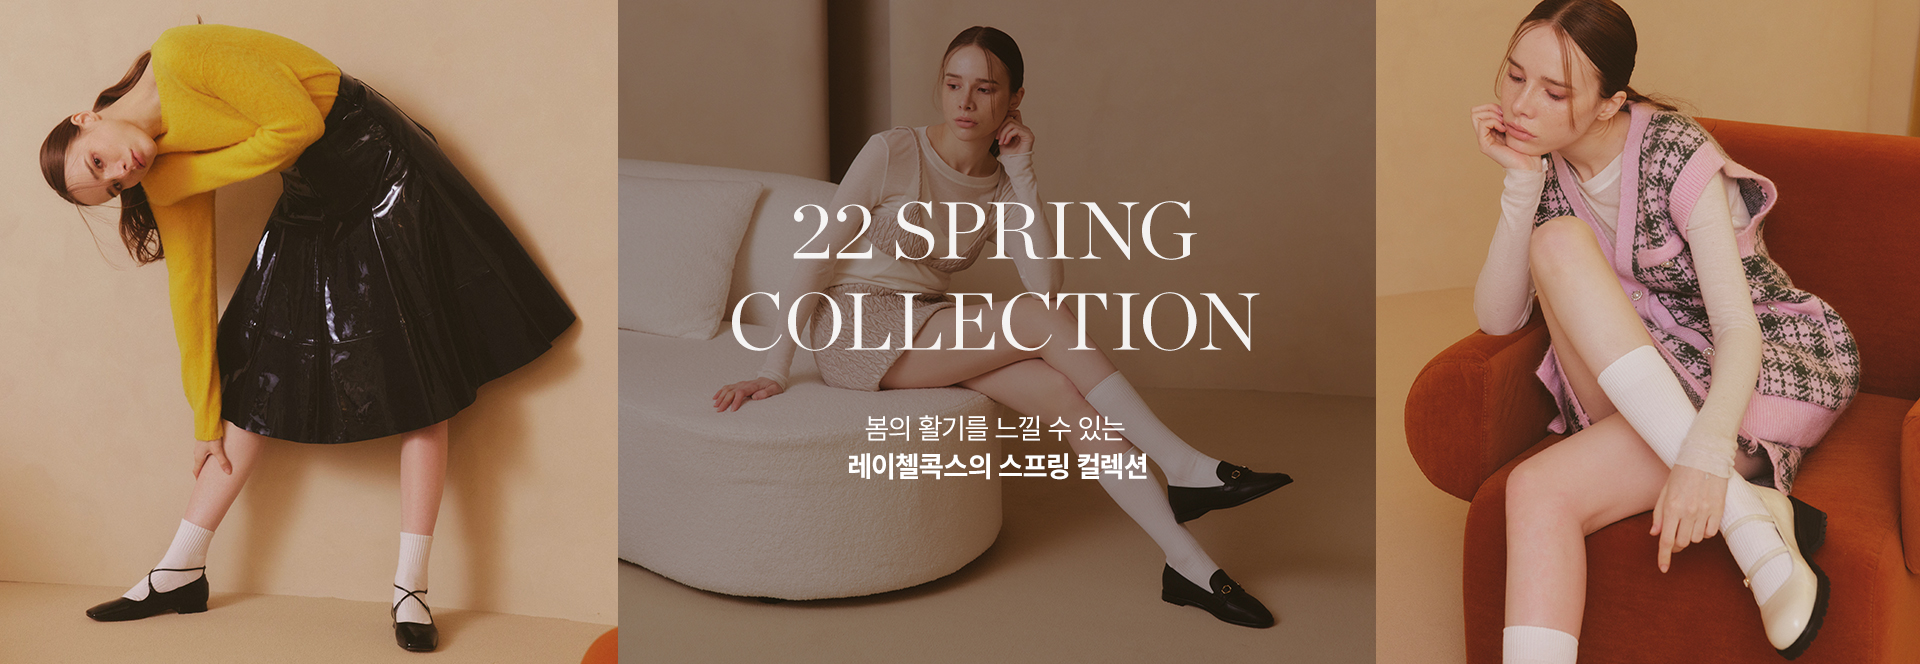 22 SPRING COLLECTION